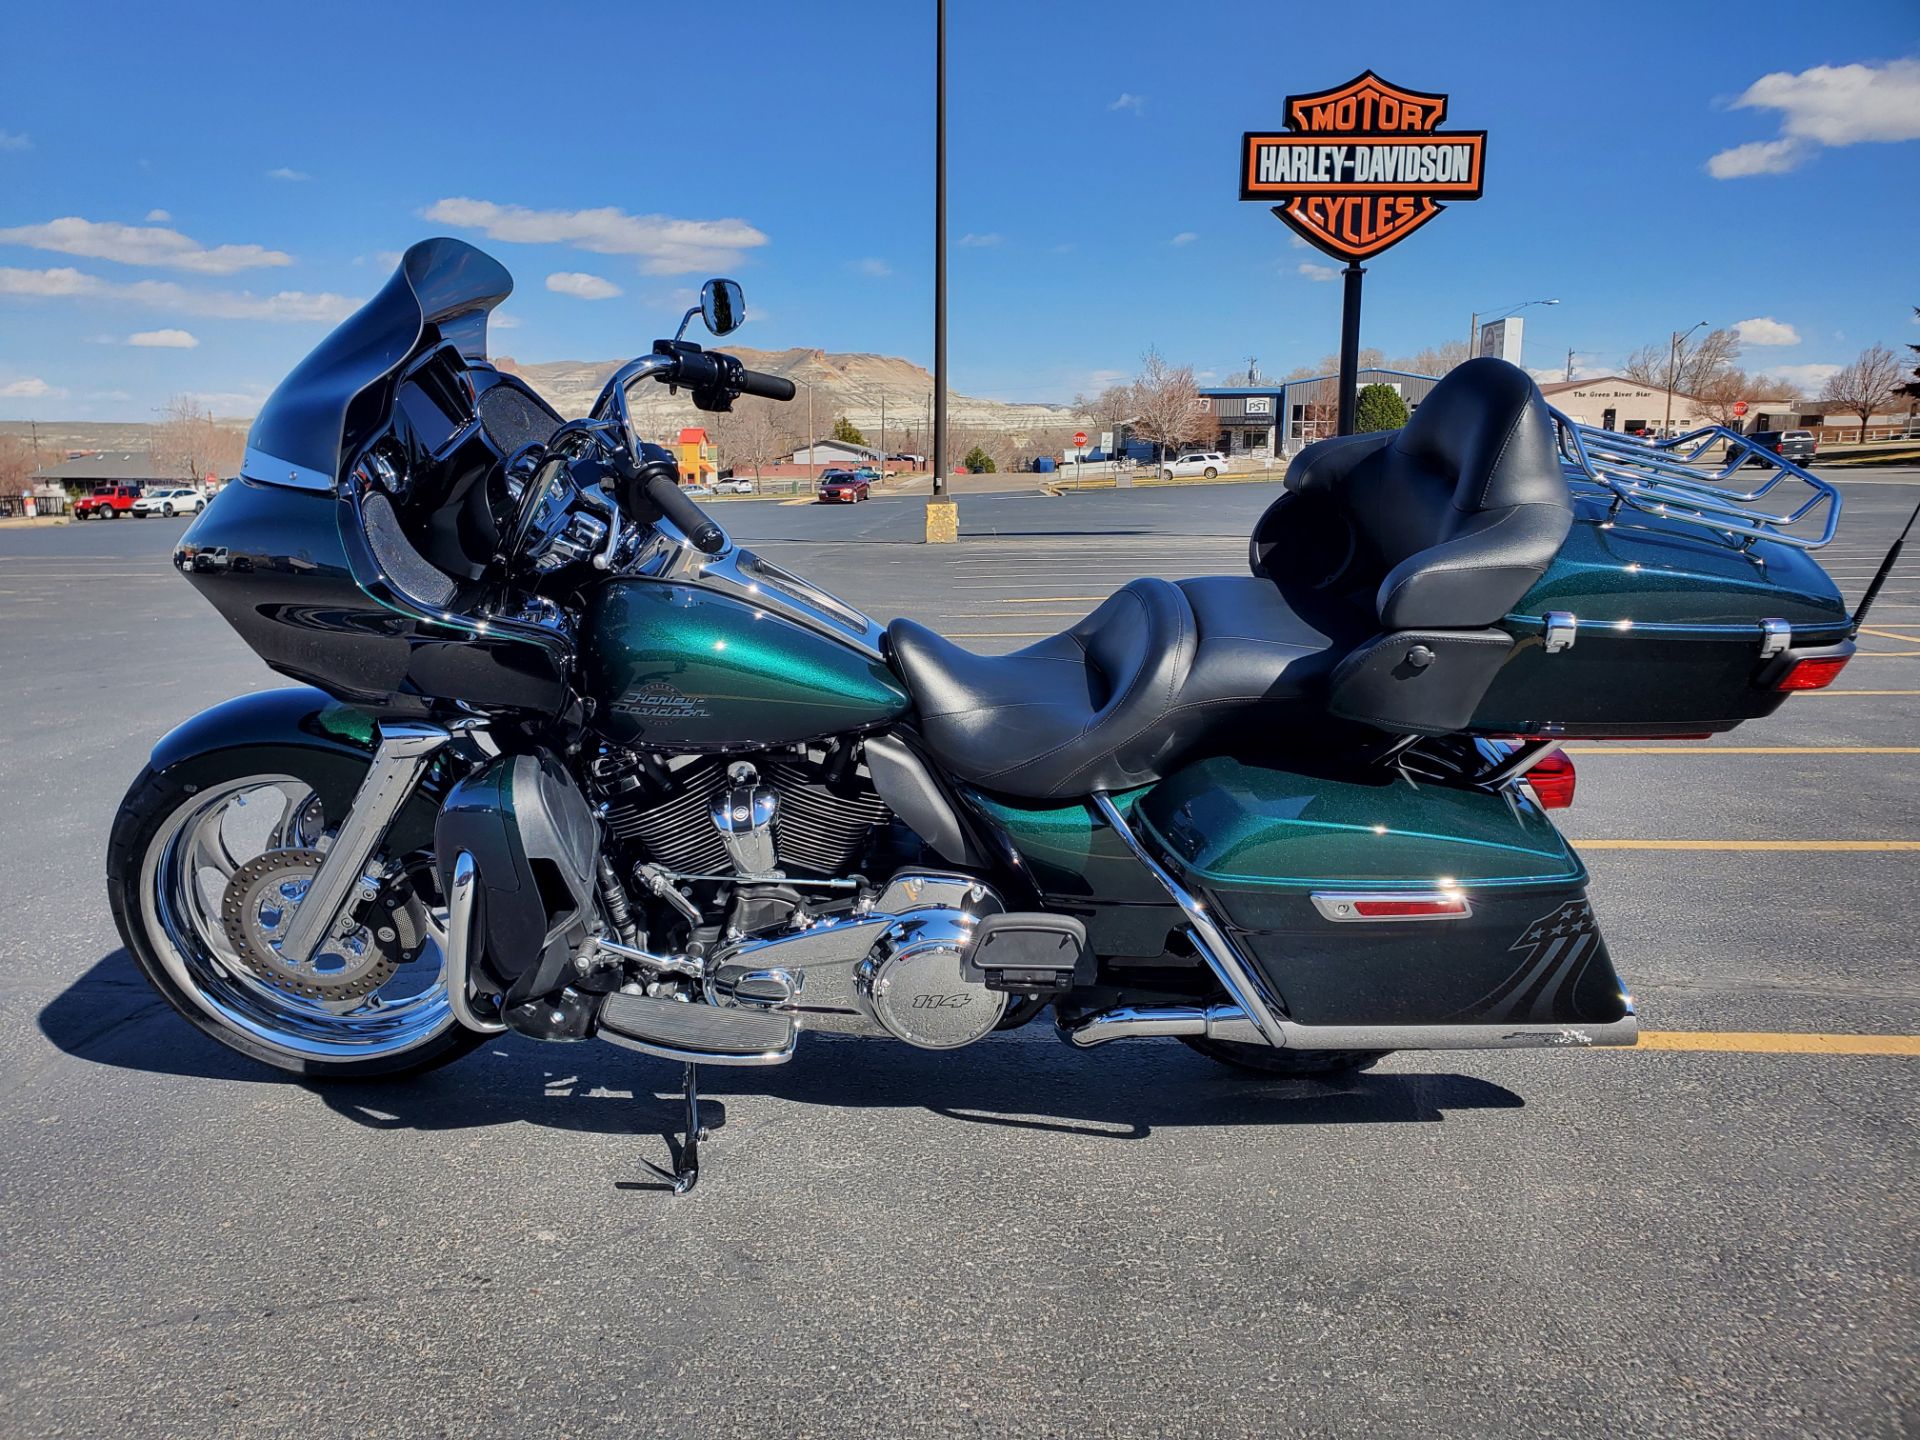 2021 Harley-Davidson Road Glide® Limited in Green River, Wyoming - Photo 8